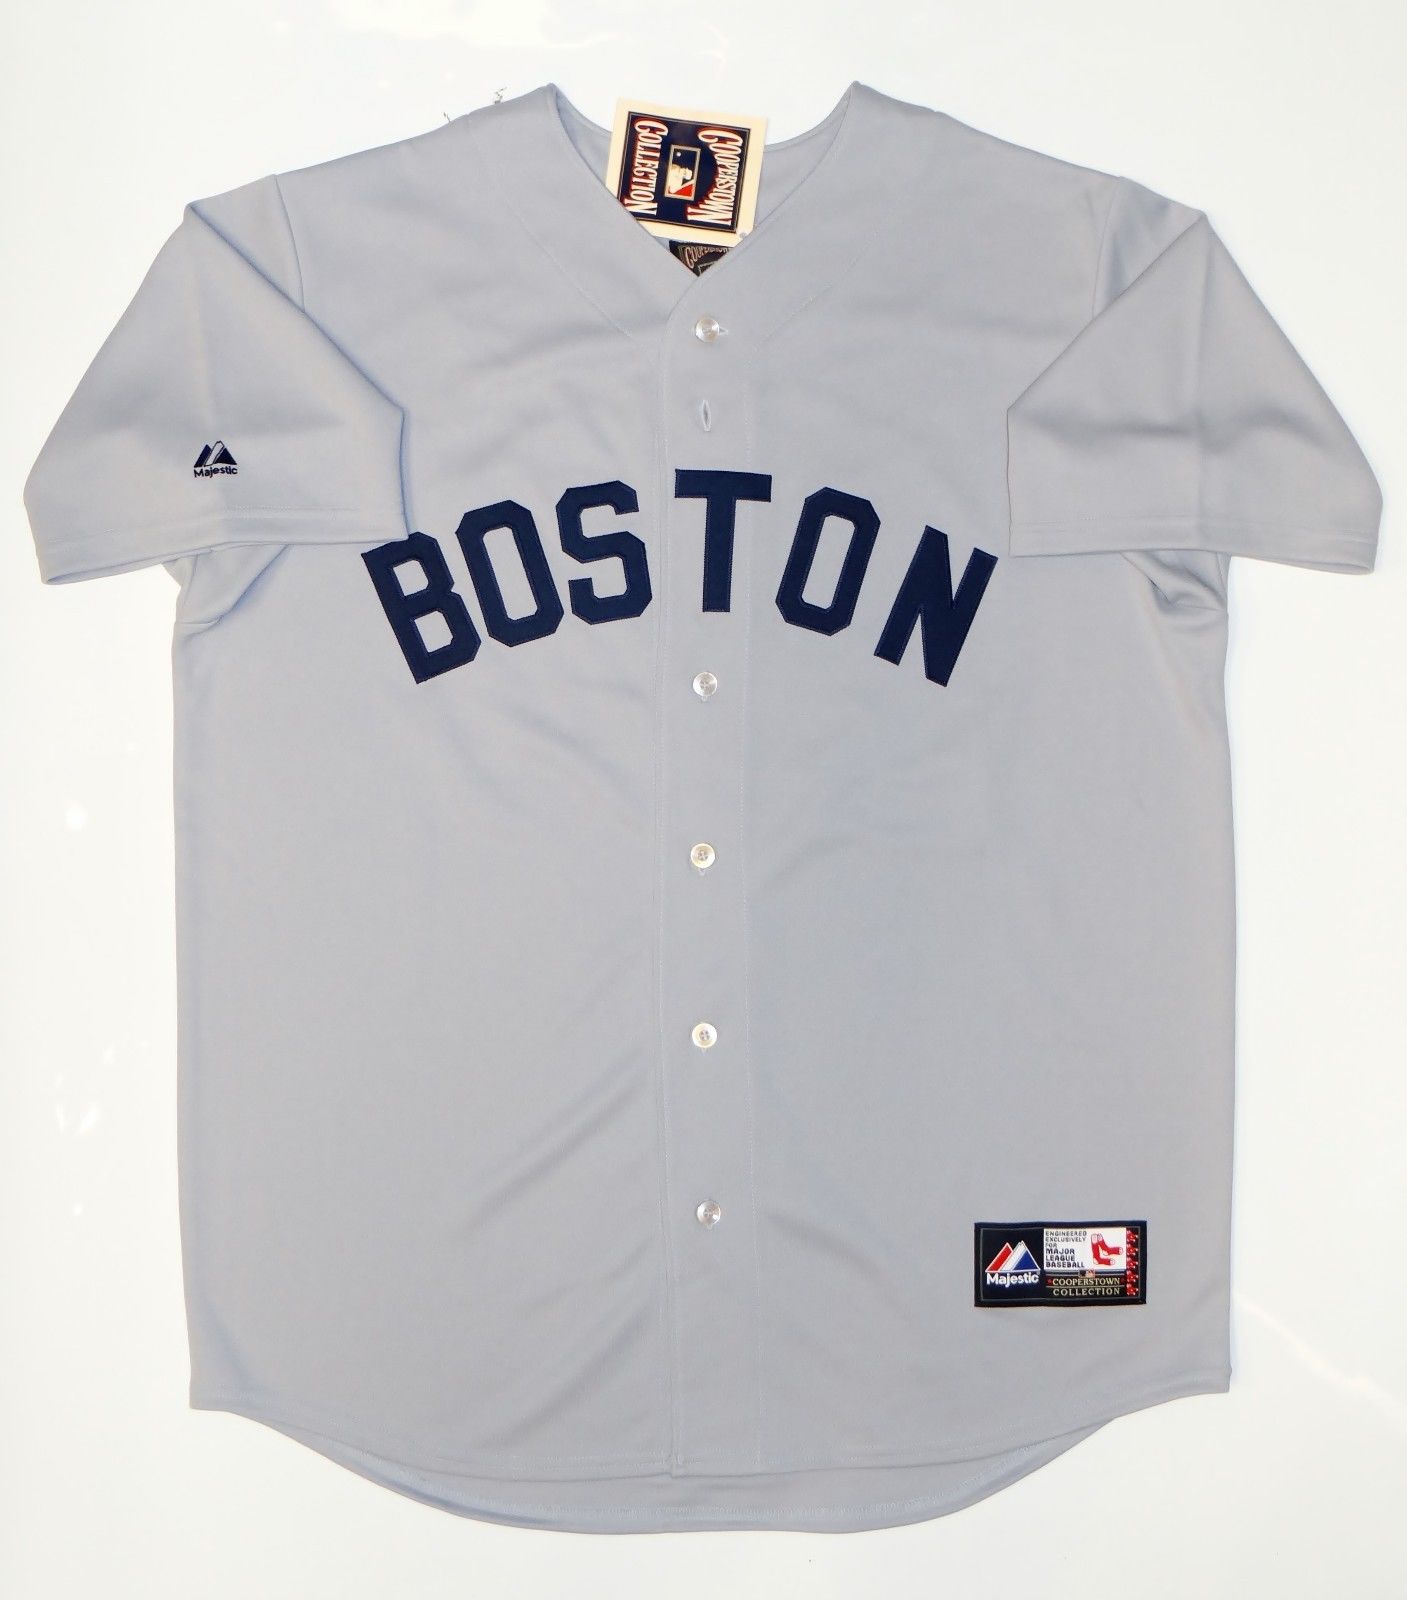 cooperstown jersey